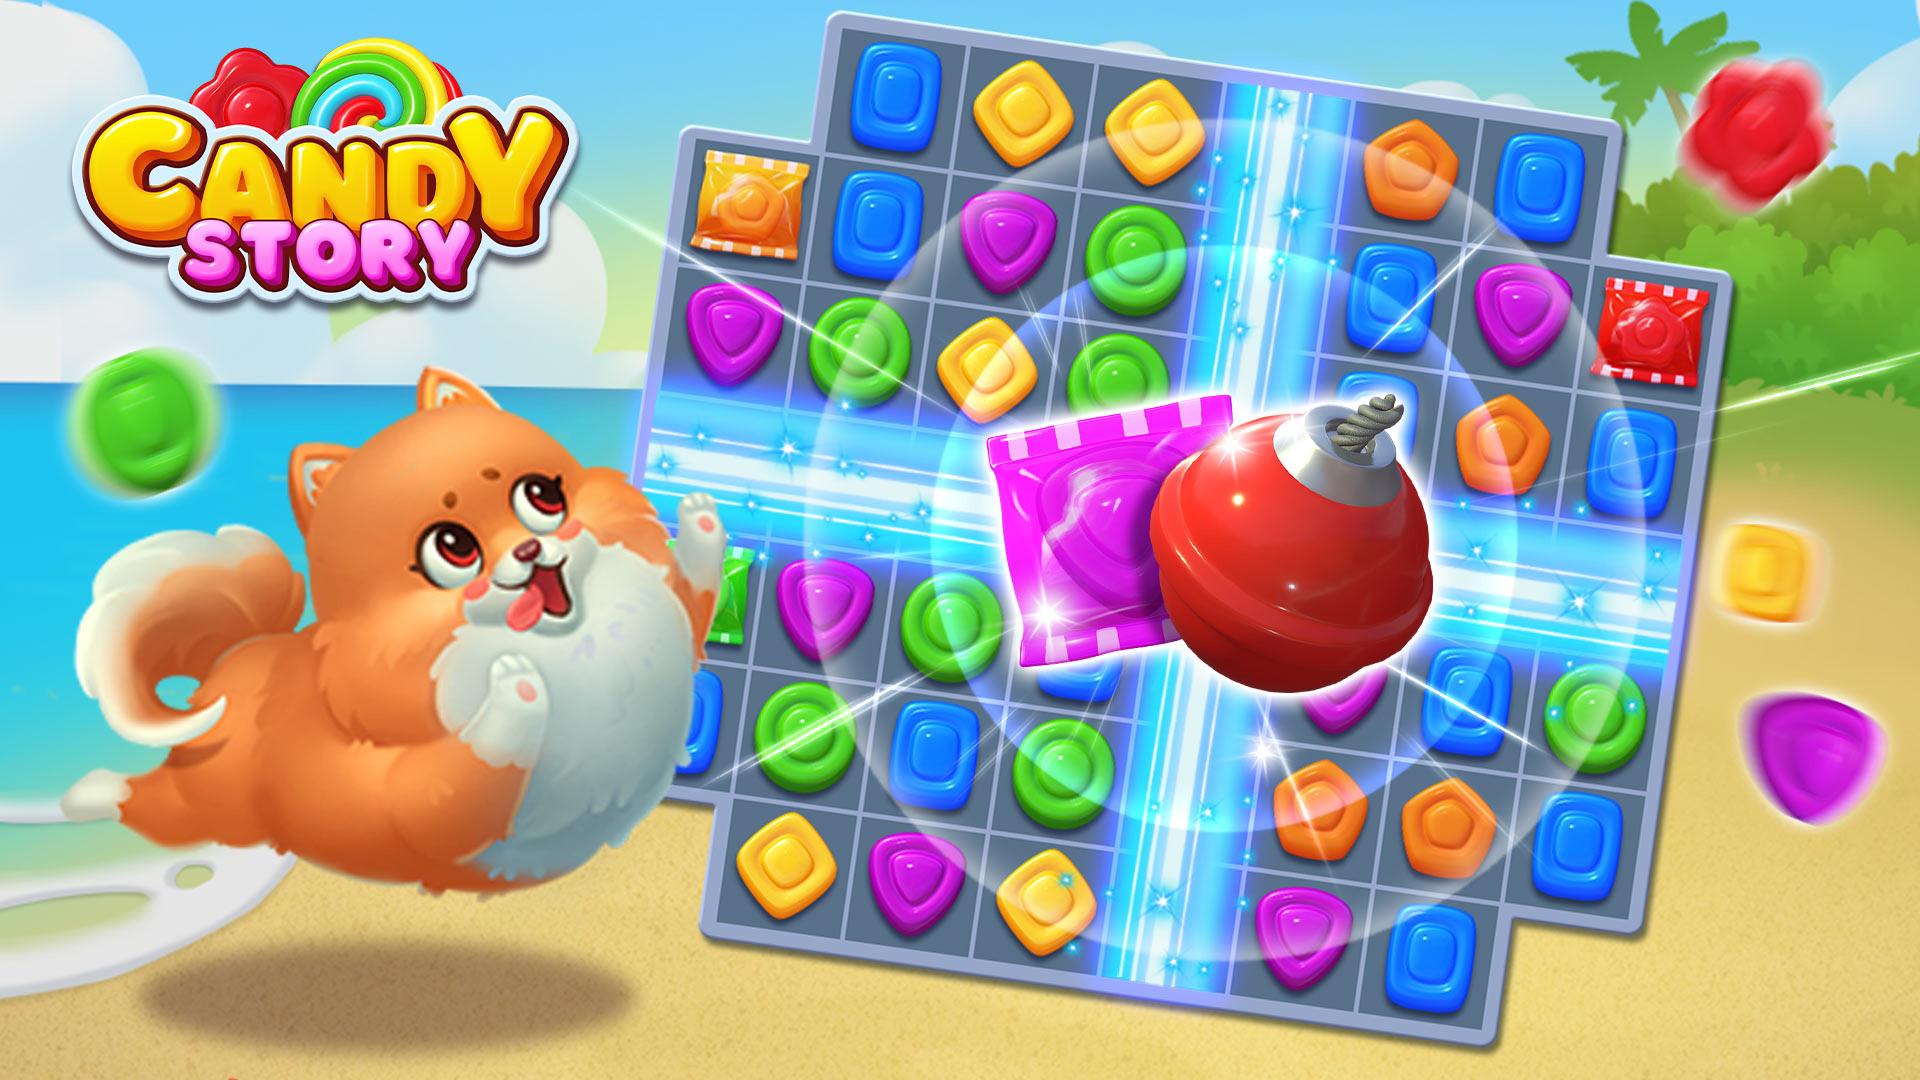 Candy story. Sweet Candy игра. Sweet Candy Match 3. Candy charming-Match 3 Puzzle. Игра-пазл remember, Candy.